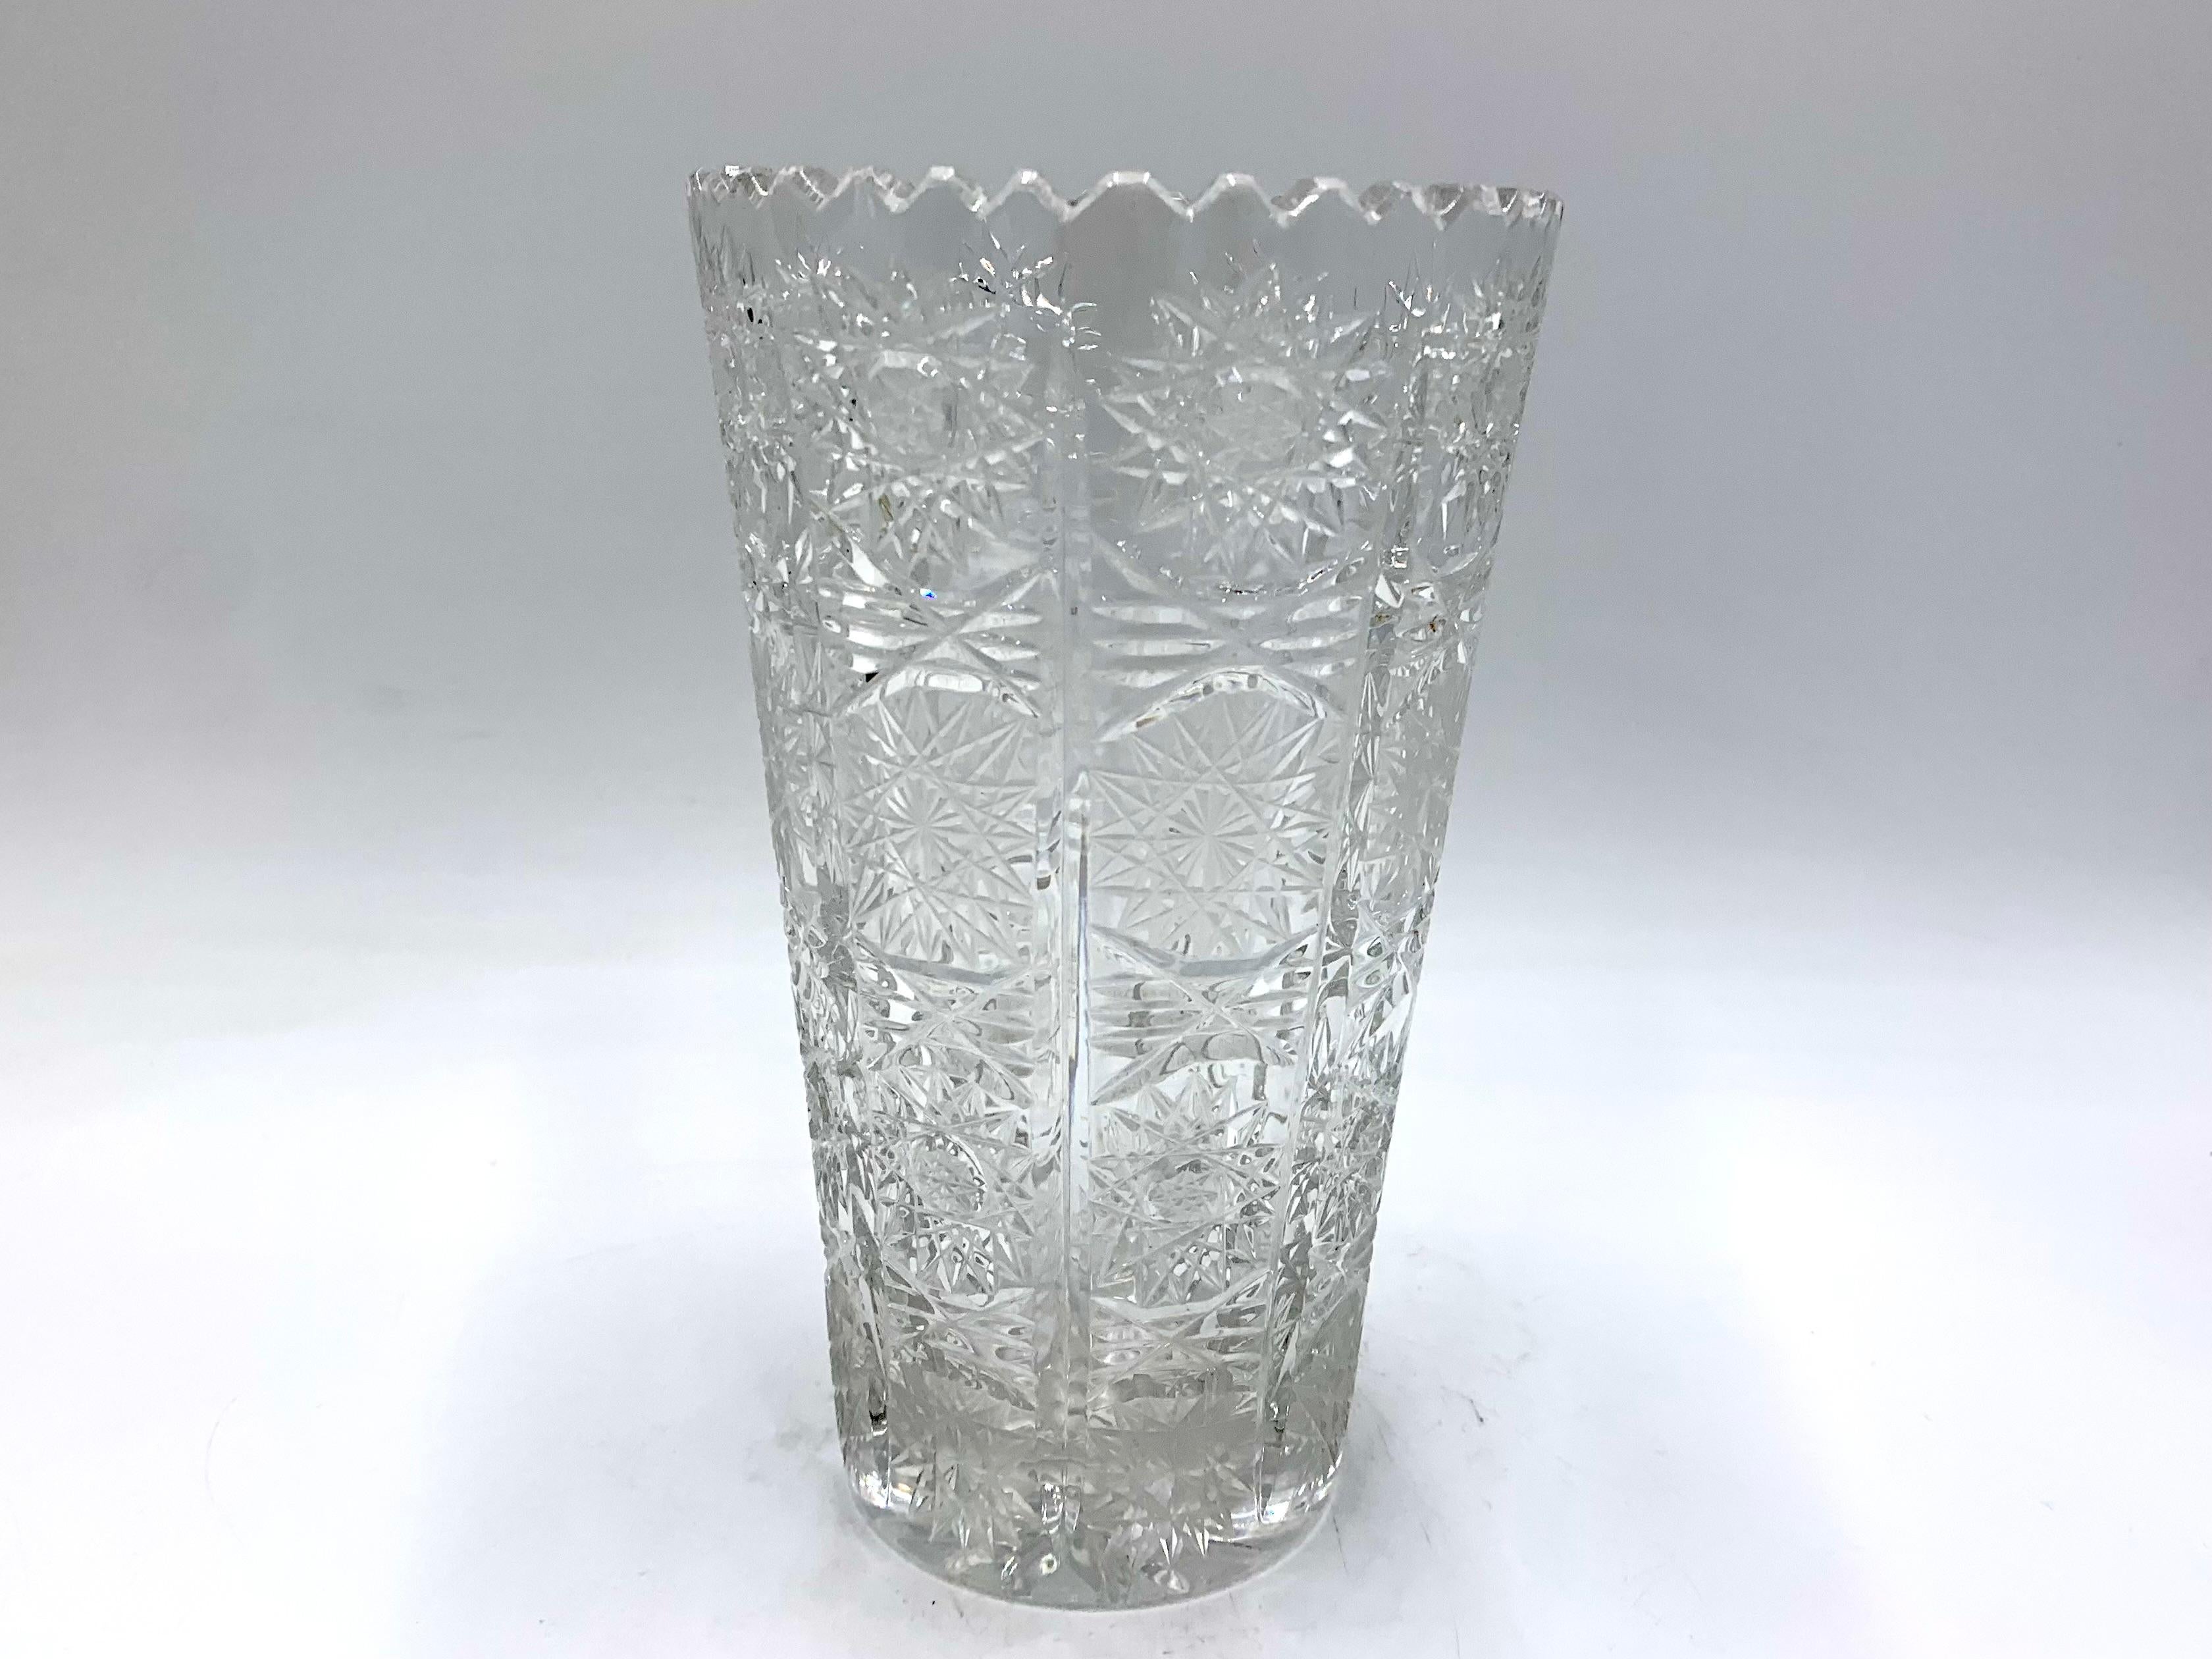 A crystal vase in a shade of burgundy

Produced in Poland in the 1960s by the Julia Glassworks

Very good condition.

Measures: Height 20cm, diameter 12cm.